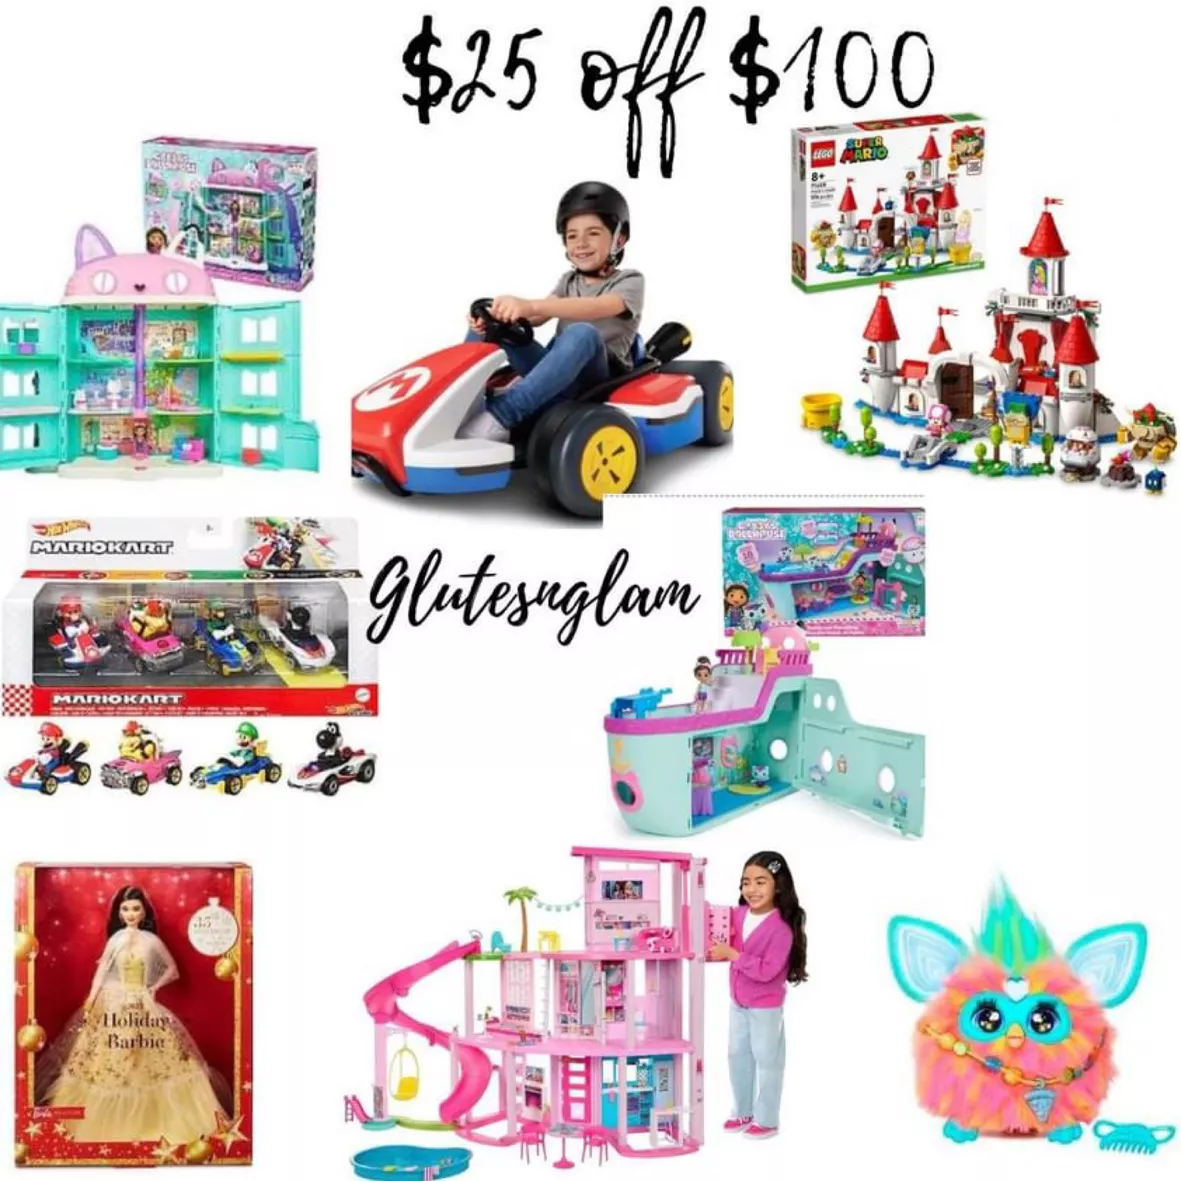 Under $10 Clearance Kids Toys